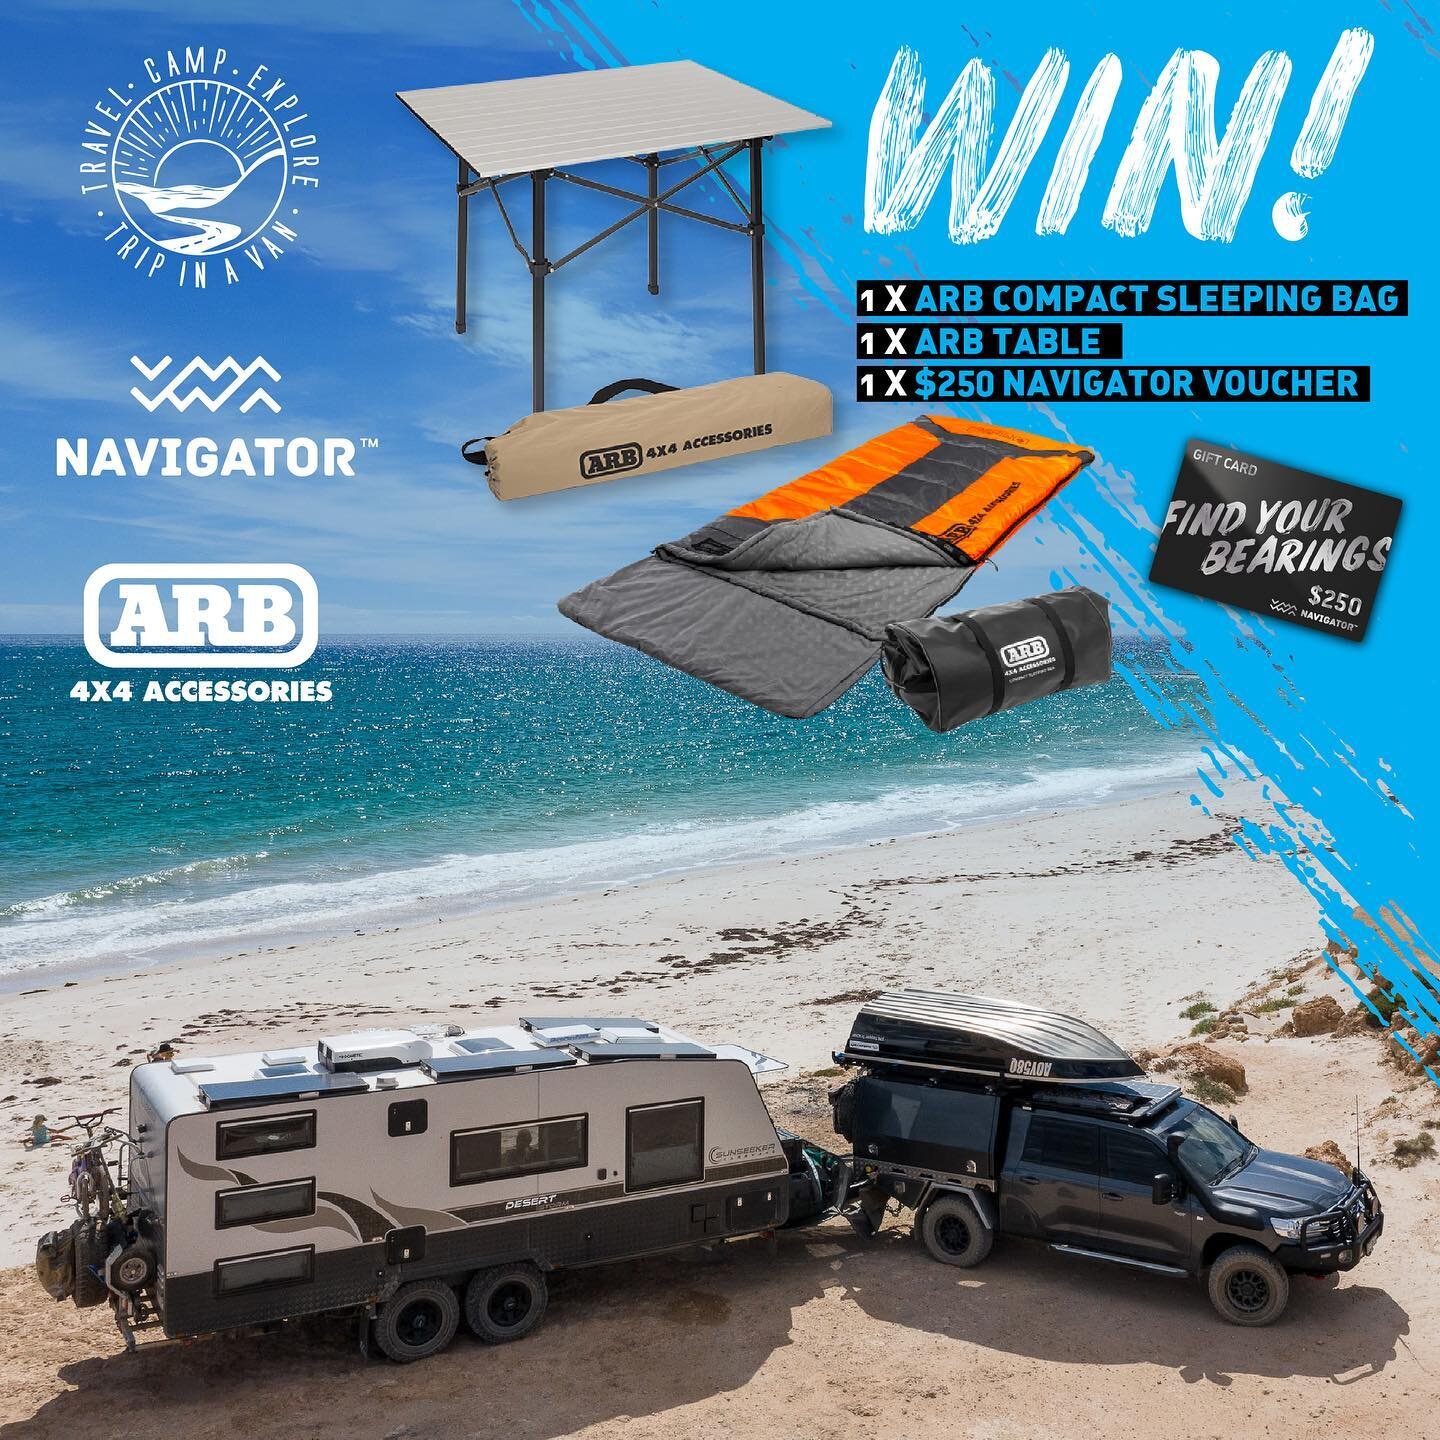 GIVEAWAY?
Win this great gear from @navigatorgearau and @arb4x4 ?
- 1 x ARB compact sleeping bag
- 1 x ARB Table
- 1 x $250 Navigator voucher
Remember we have 15% off storewide at @navigatorgearau - just use coupon TIAV15
?How to enter?
- follow @tripinavan
- tag 2 mates
?Extra entries if you share to ya stories and follow the big fella @justins_roadtrip
ℹ️random winner drawn on wednesday 17th March and announced here on Insta ?